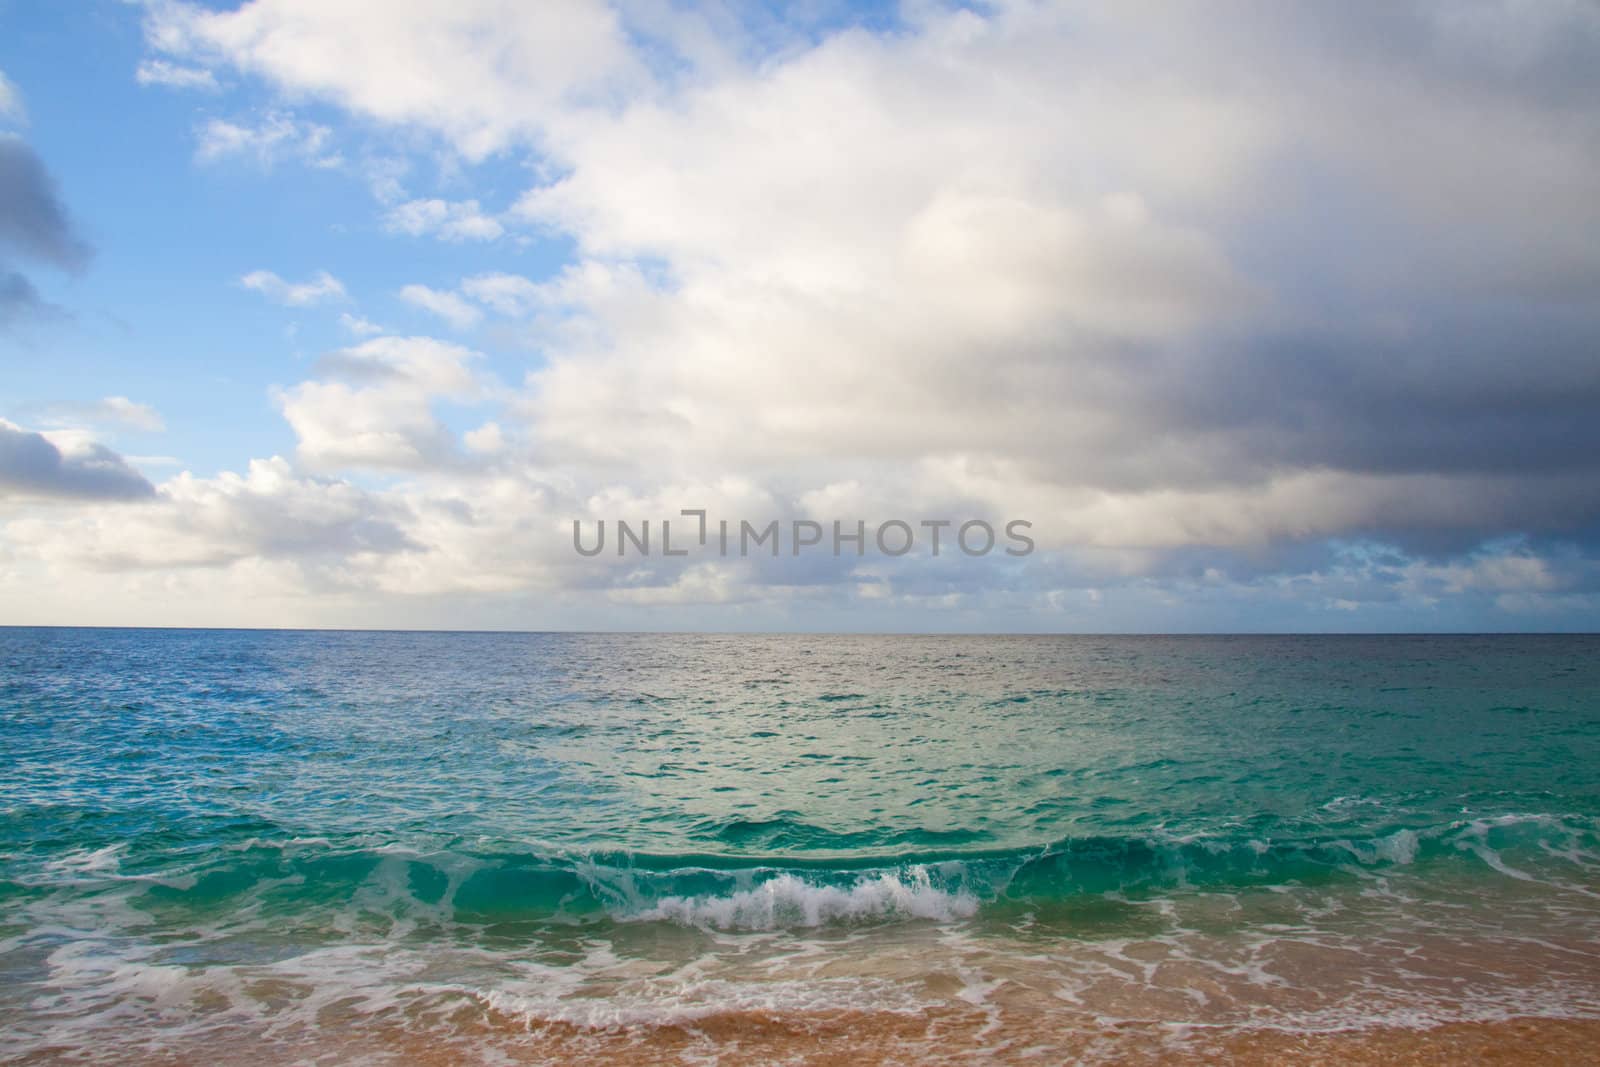 A beautiful beach with nobody in the scene as well as a dynamic sky and nice turquoise and blue tones throughout in color.